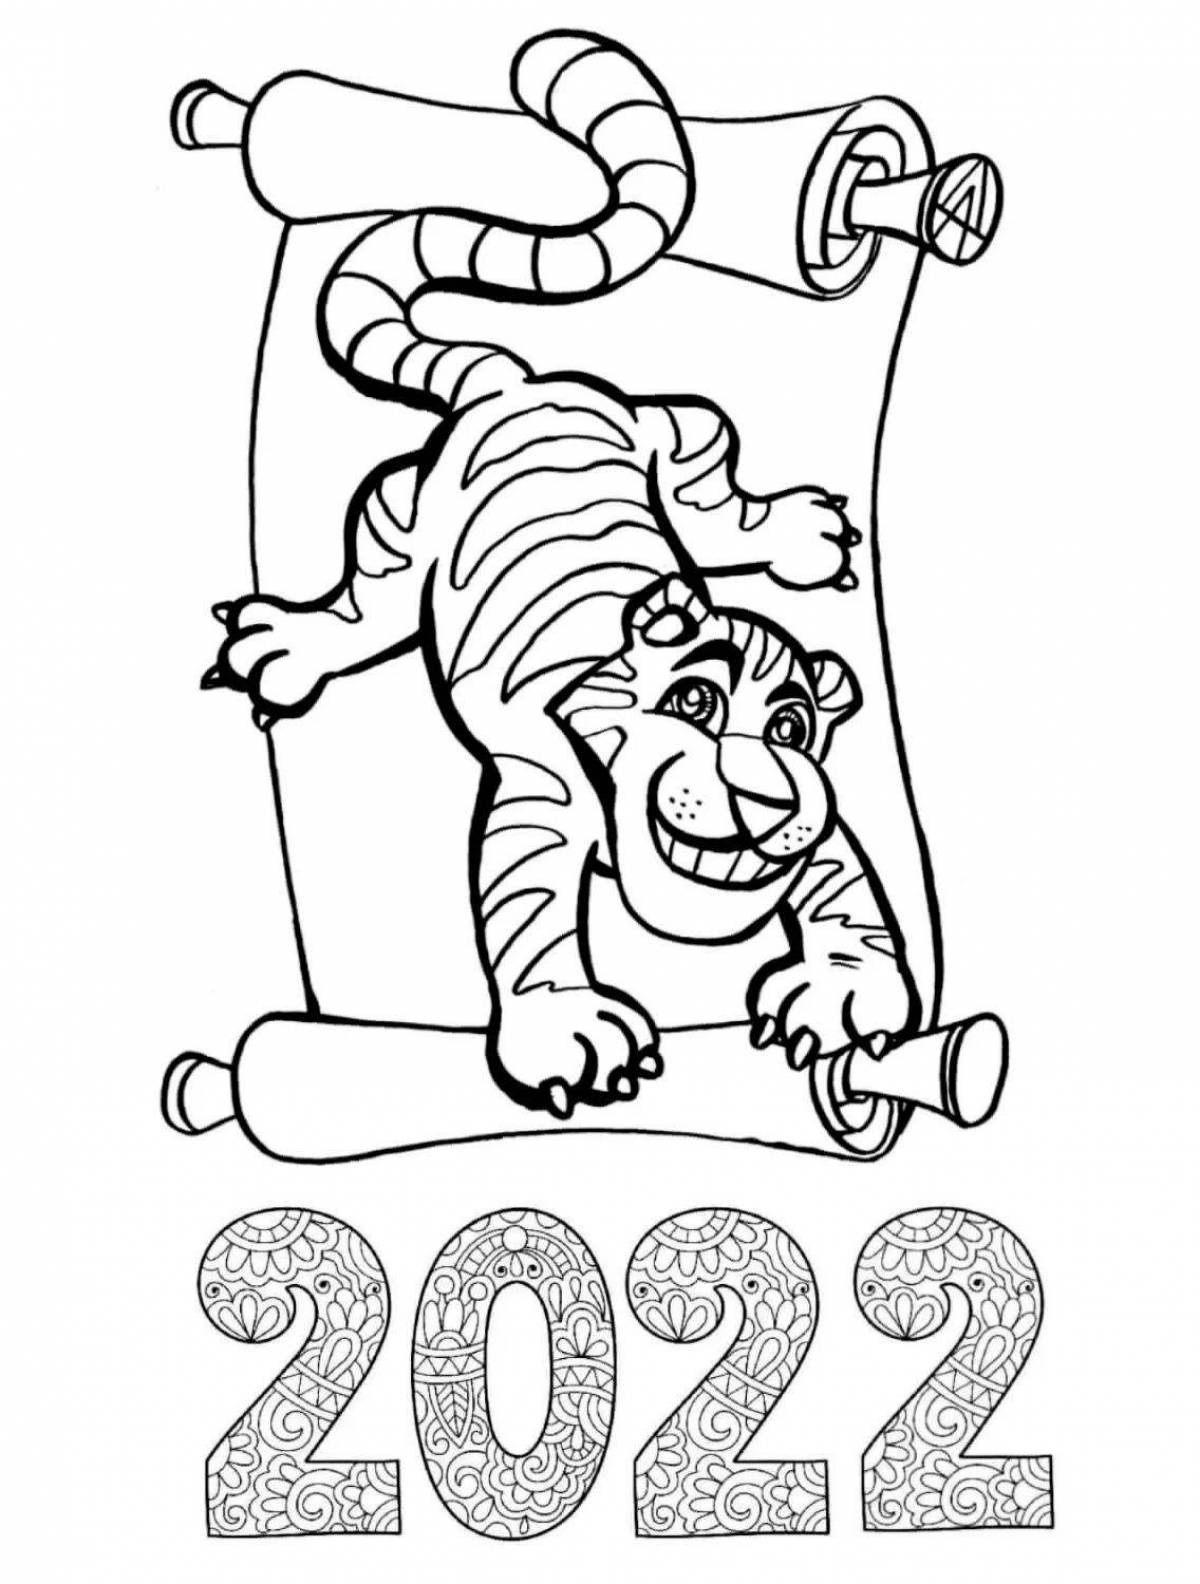 Coloring page magnificent symbol of the year